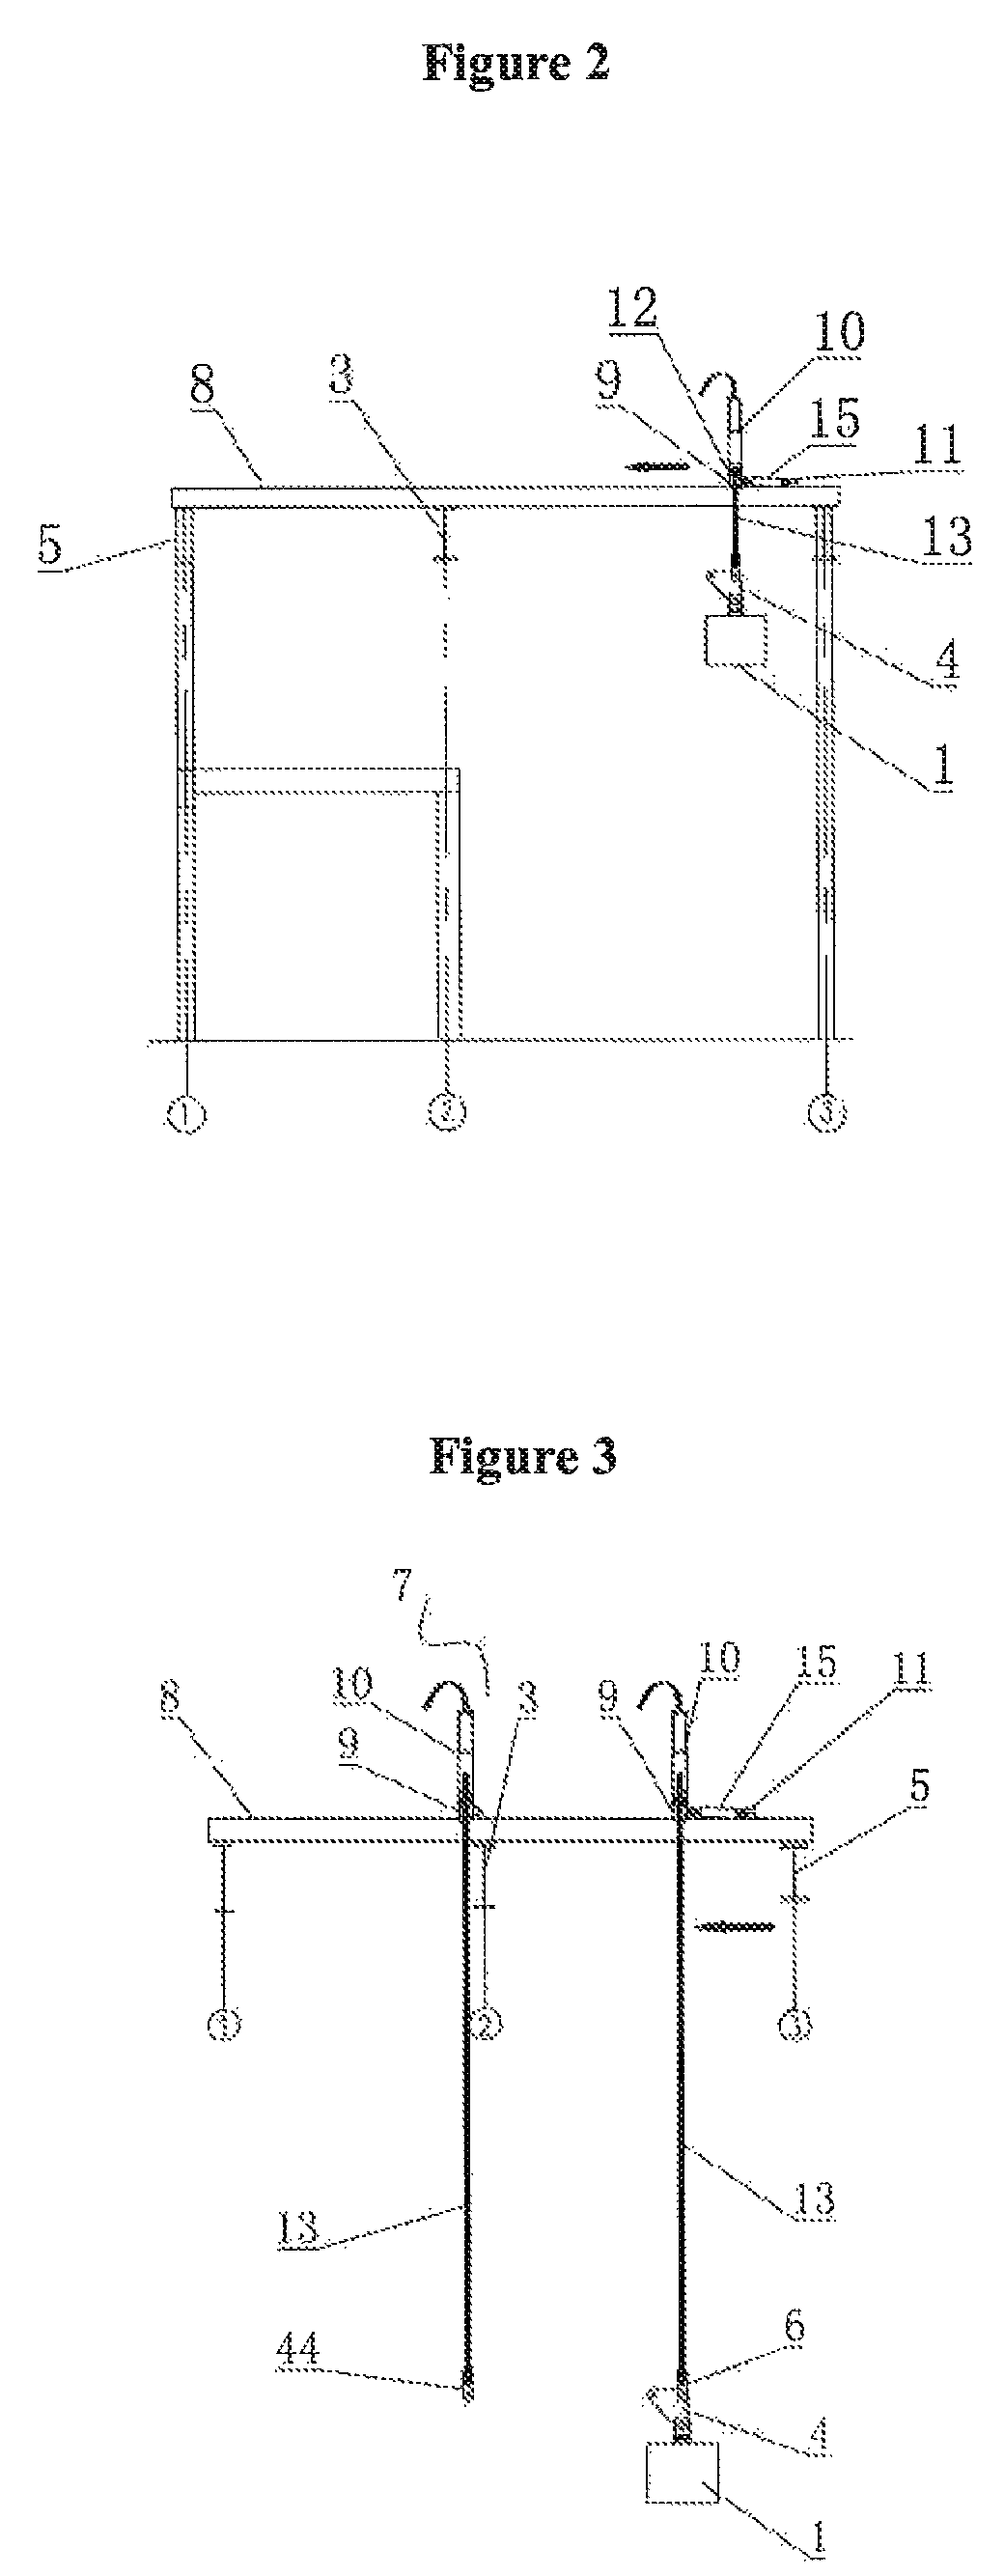 Construction apparatus and method for lifting and sliding object over barrier in horizontal direction